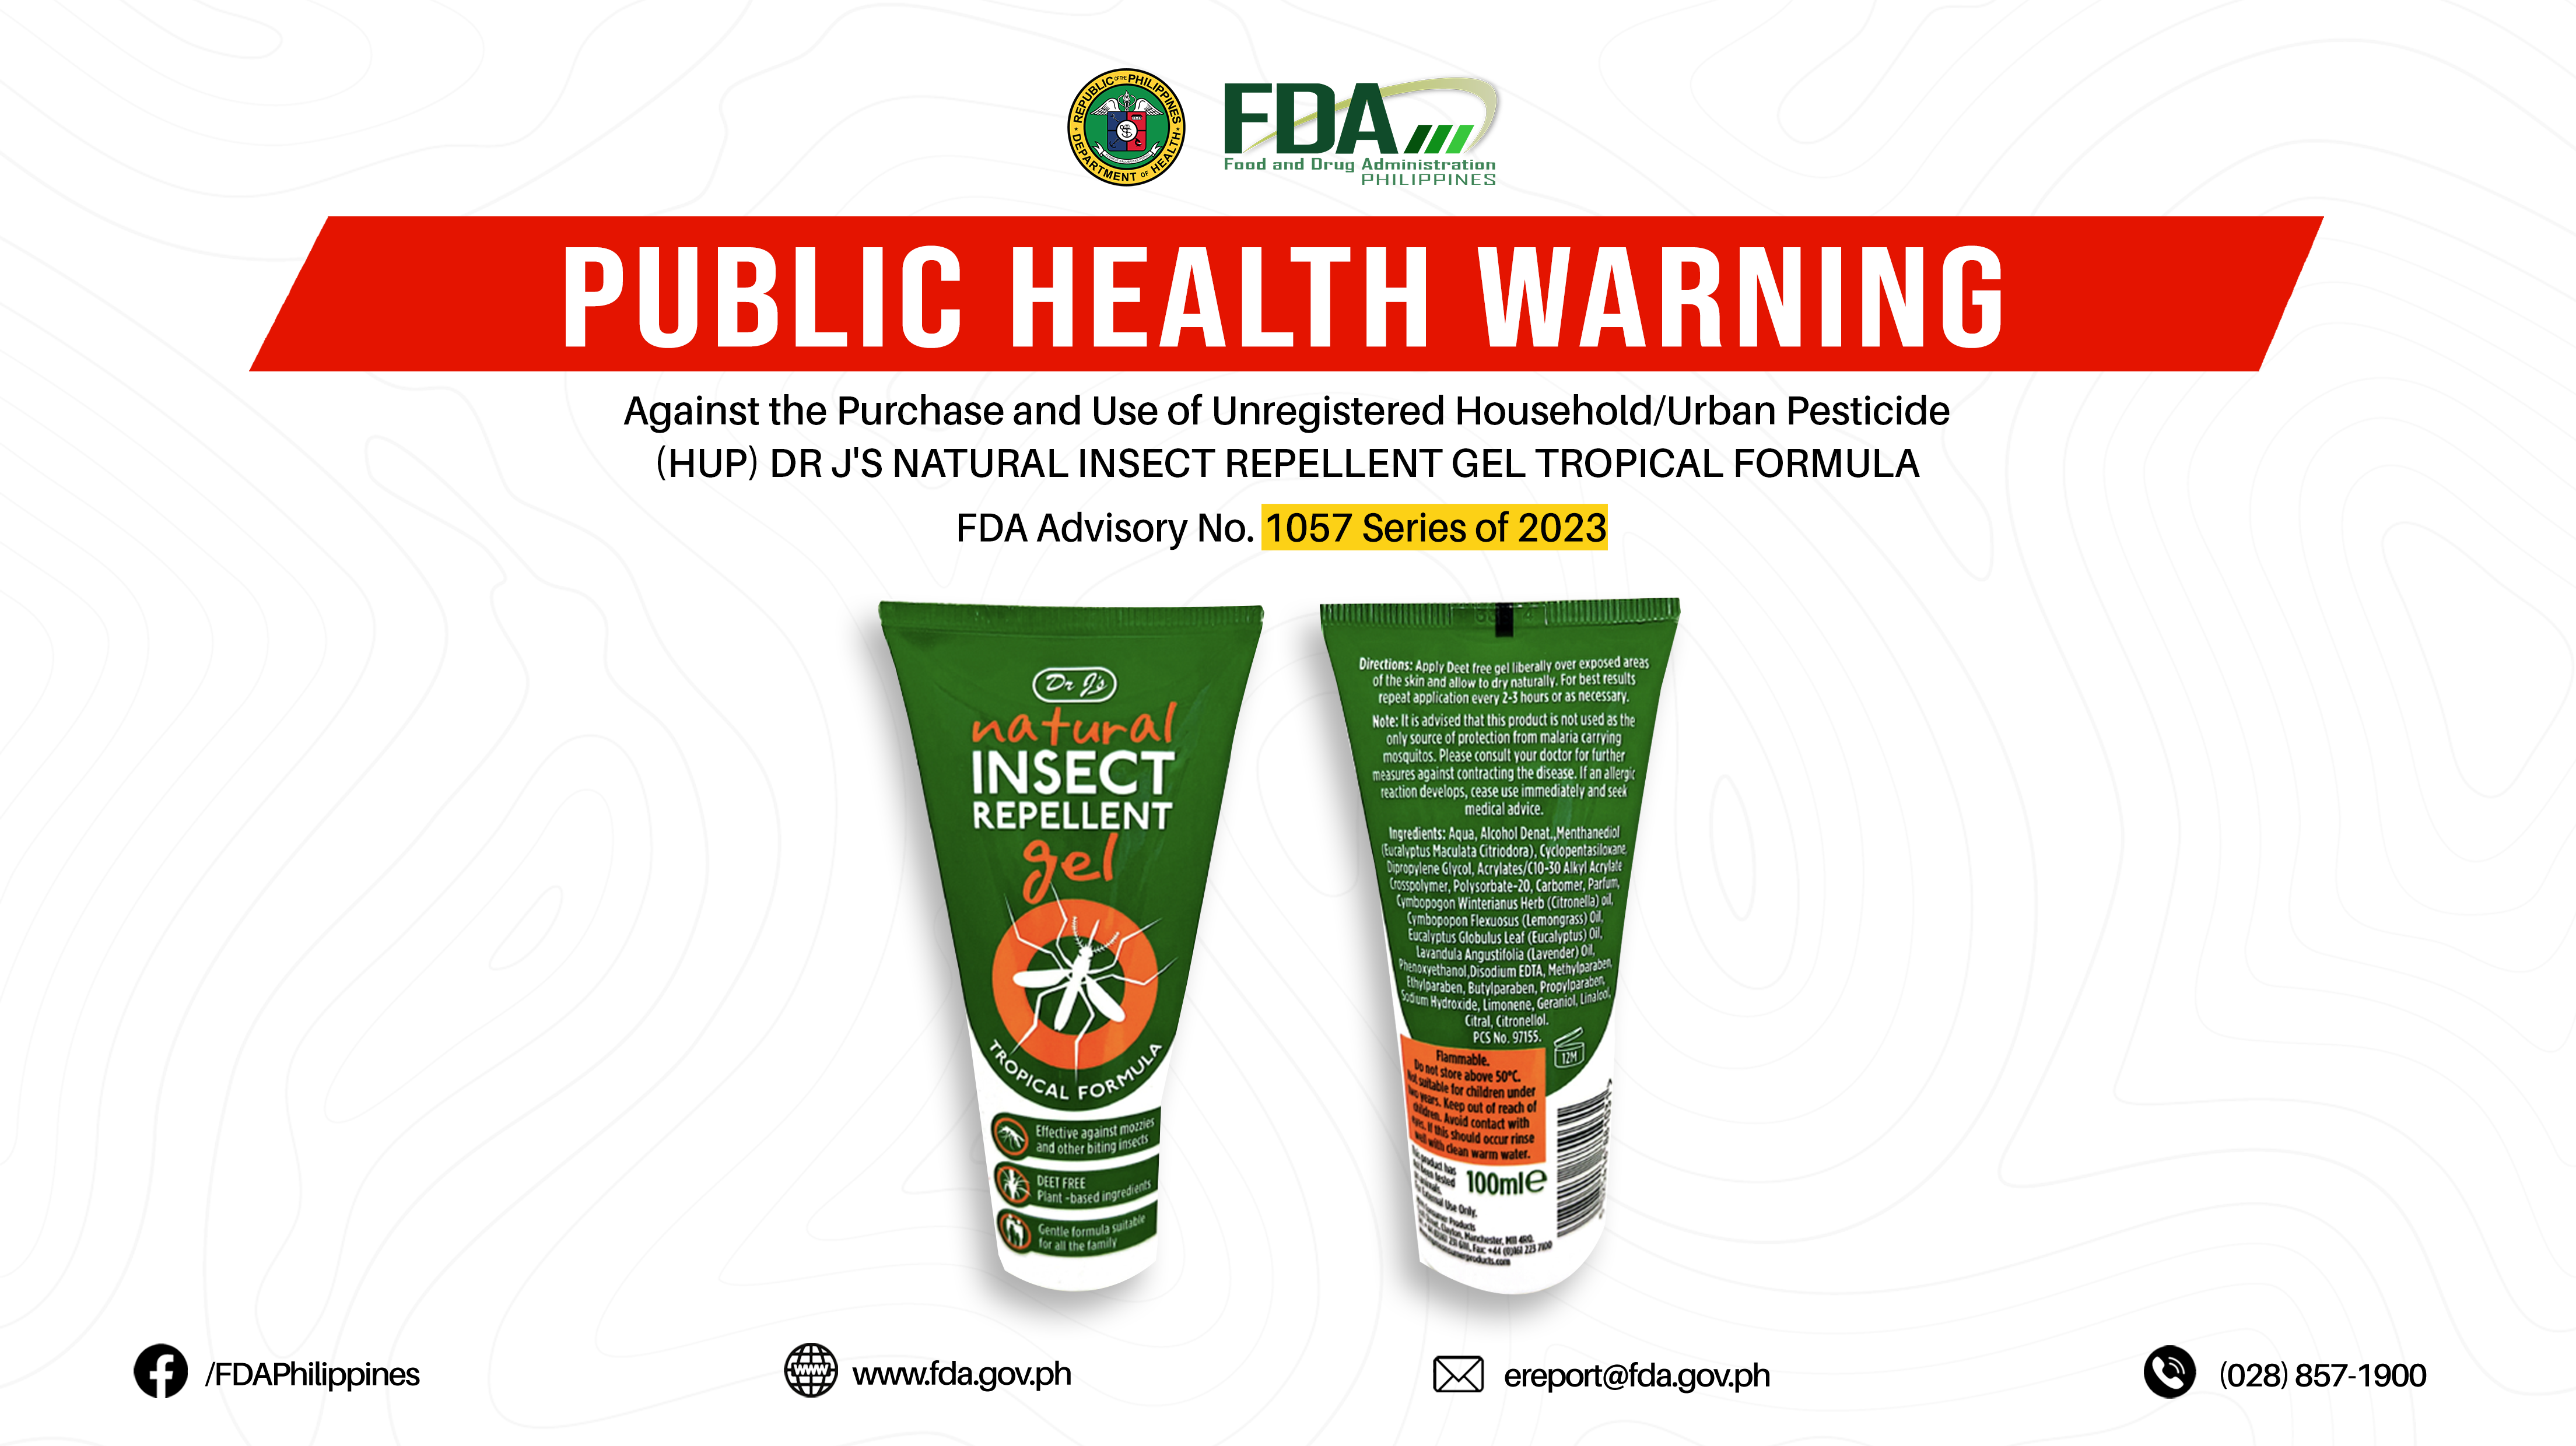 FDA Advisory No.2023-1057 || Public Health Warning Against the Purchase and Use of Unregistered Household/Urban Pesticide (HUP) DR J’S NATURAL INSECT REPELLENT GEL TROPICAL FORMULA